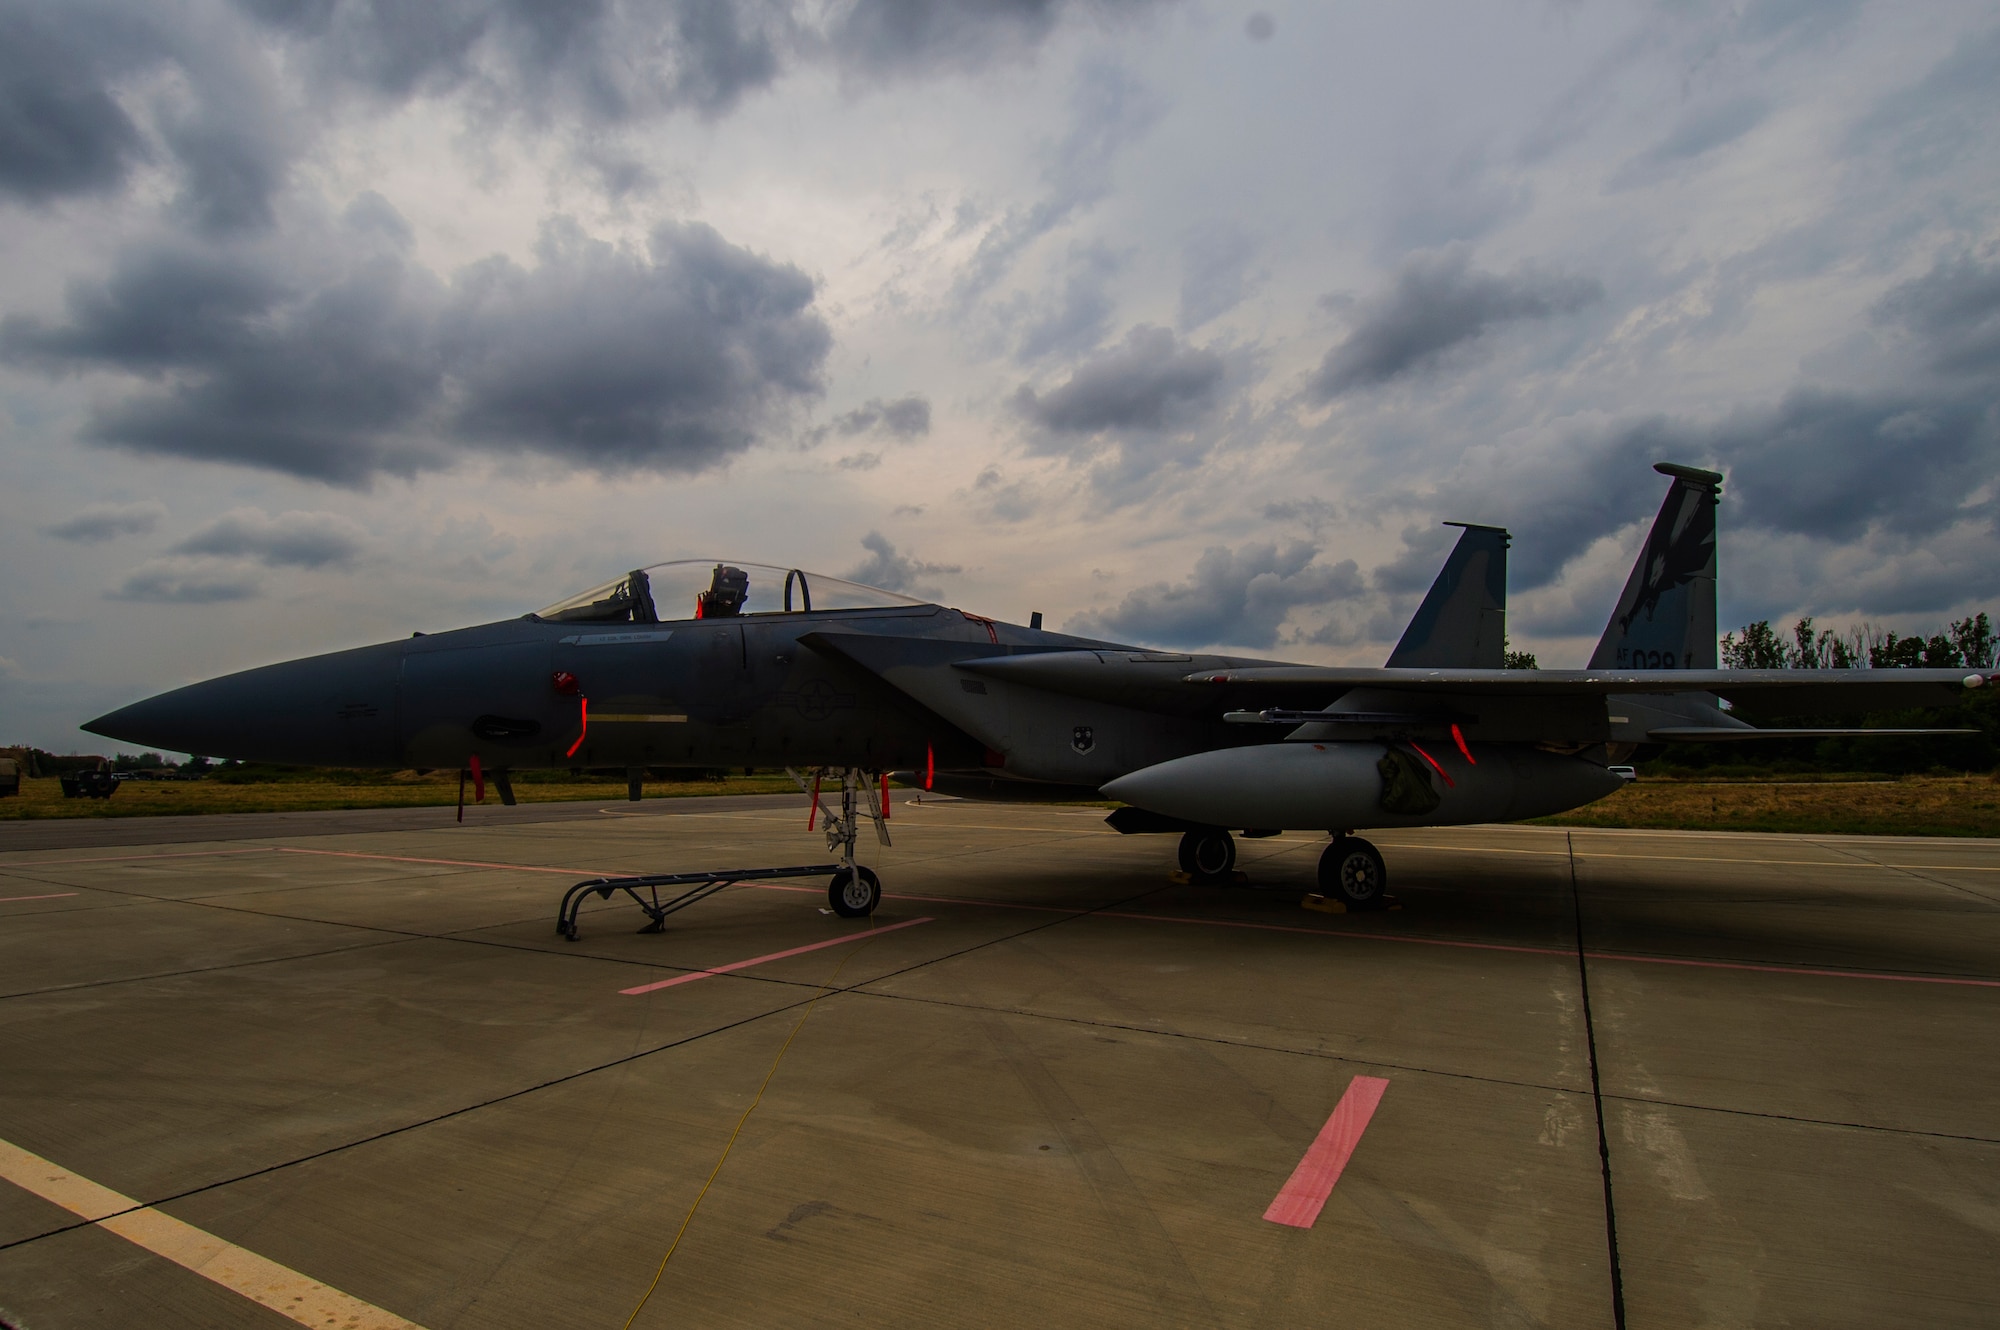 A California Air National Guard F-15C Eagle remains parked on the flightline at Graf Ignatievo, Bulgaria, Sept. 7, 2016. Four F-15Cs assigned to the 194th Expeditionary Fighter Squadron will conduct joint NATO air policing missions with the Bulgarian air force to police the host nation’s sovereign airspace Sept. 9-16, 2016. The squadron forward deployed to Graf Ignatievo from Campia Turzii, Romania, where they serve on a theater security package deployment to Europe as a part of Operation Atlantic Resolve. (U.S. Air Force photo by Staff Sgt. Joe W. McFadden) 